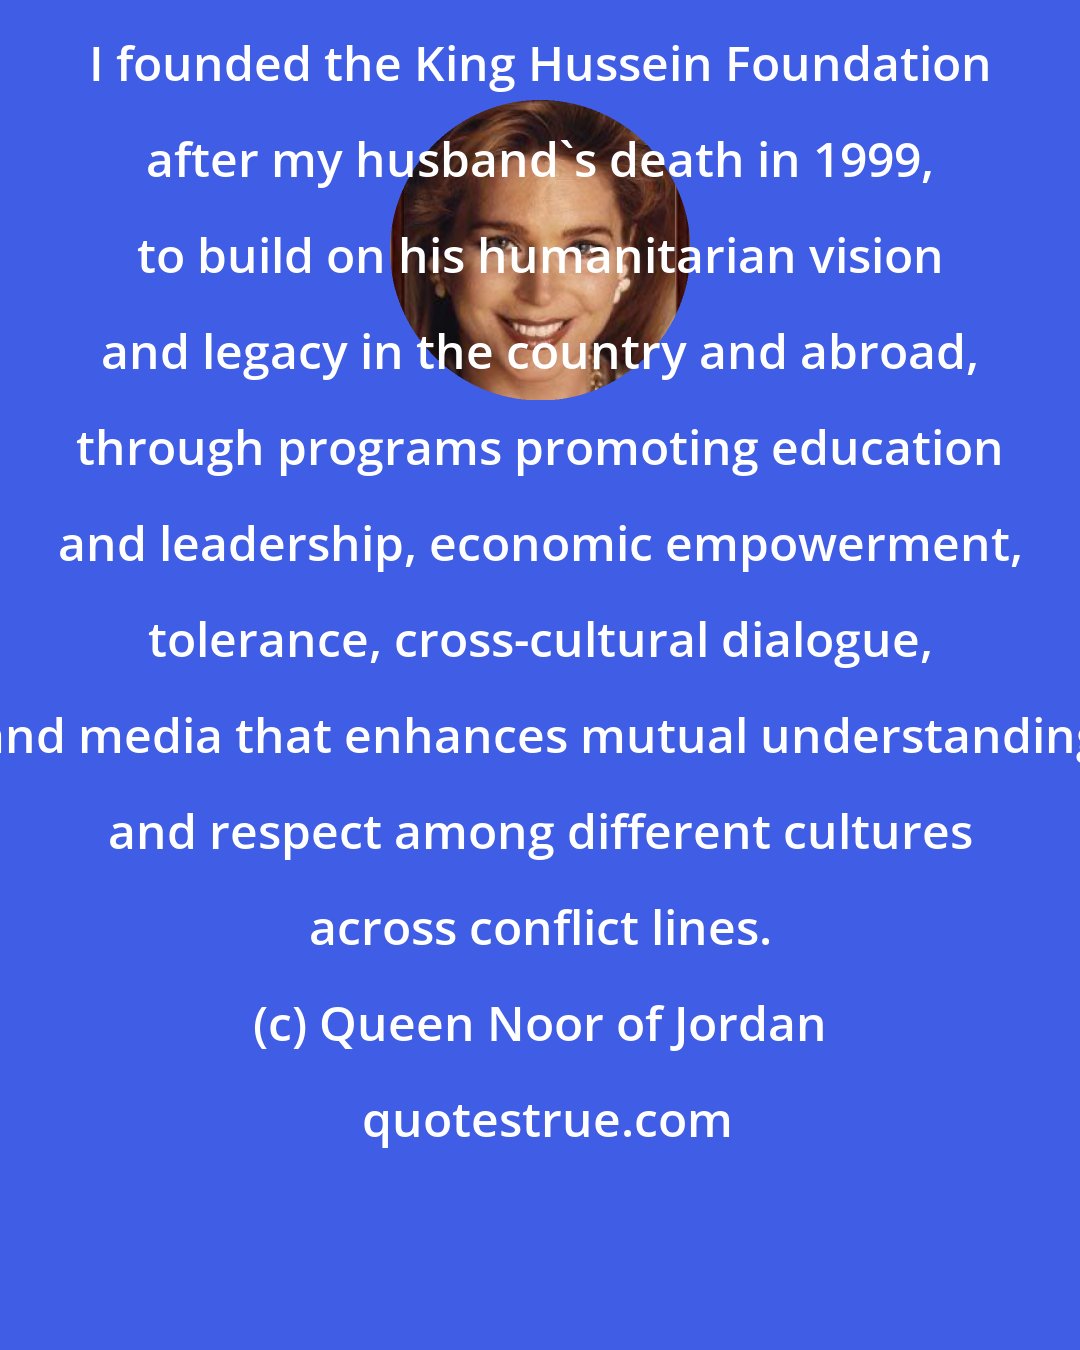 Queen Noor of Jordan: I founded the King Hussein Foundation after my husband's death in 1999, to build on his humanitarian vision and legacy in the country and abroad, through programs promoting education and leadership, economic empowerment, tolerance, cross-cultural dialogue, and media that enhances mutual understanding and respect among different cultures across conflict lines.